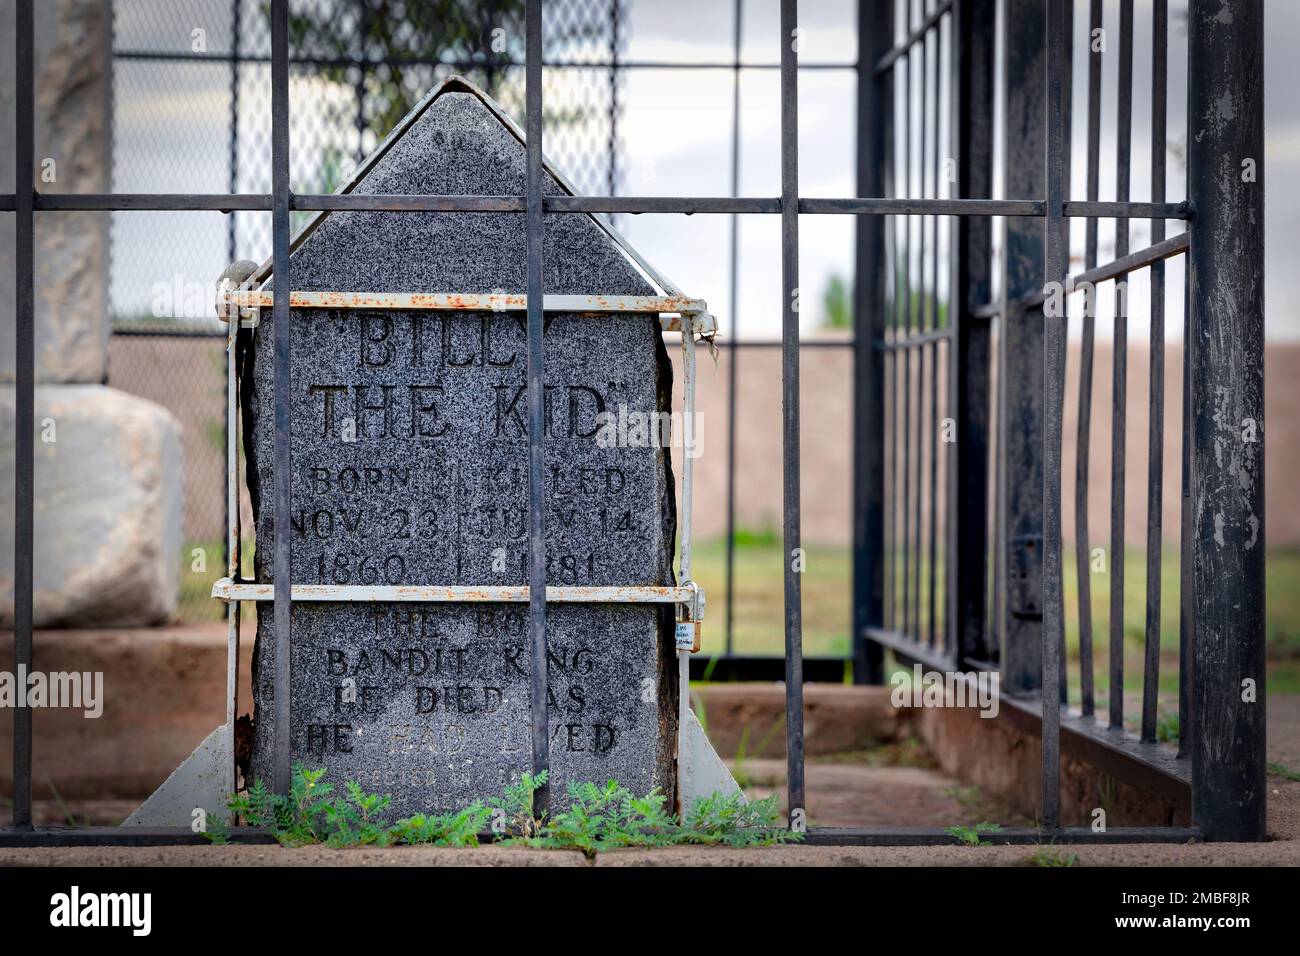 The tombstone of Henry McCarty, aka William H. Bonney, and Billy the Kid at the Old Fort Sumner Cemetery in Fort Sumner, New Mexico. Stock Photo